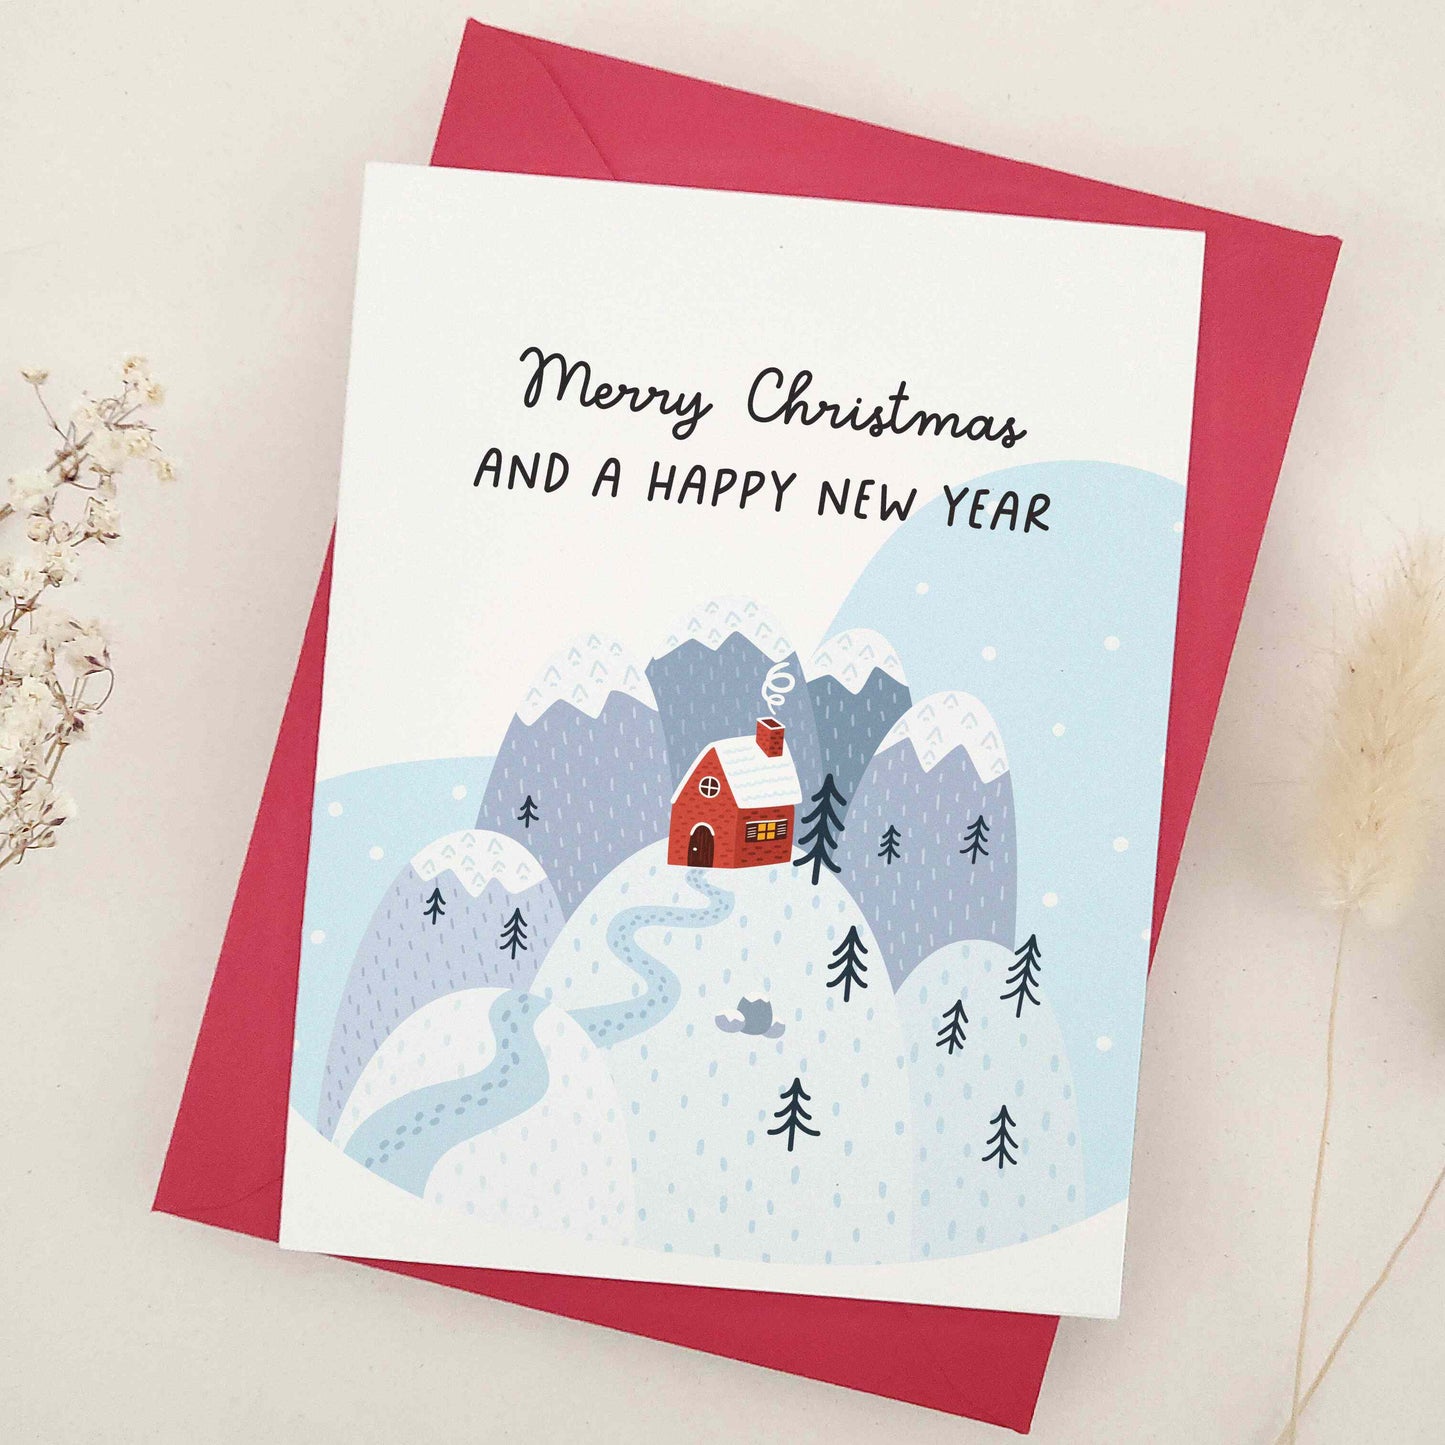 Serene 'Merry Christmas and a Happy New Year' card capturing the tranquil aspect of the festive season, with an illustration of a solitary house in a snow-covered landscape. The picturesque scenery evokes calmness and the simple joys of a quiet winter's day, reflecting a moment of solitude and reflection amidst the bustling holiday festivities, perfect for sharing unique and thoughtful festive greetings.